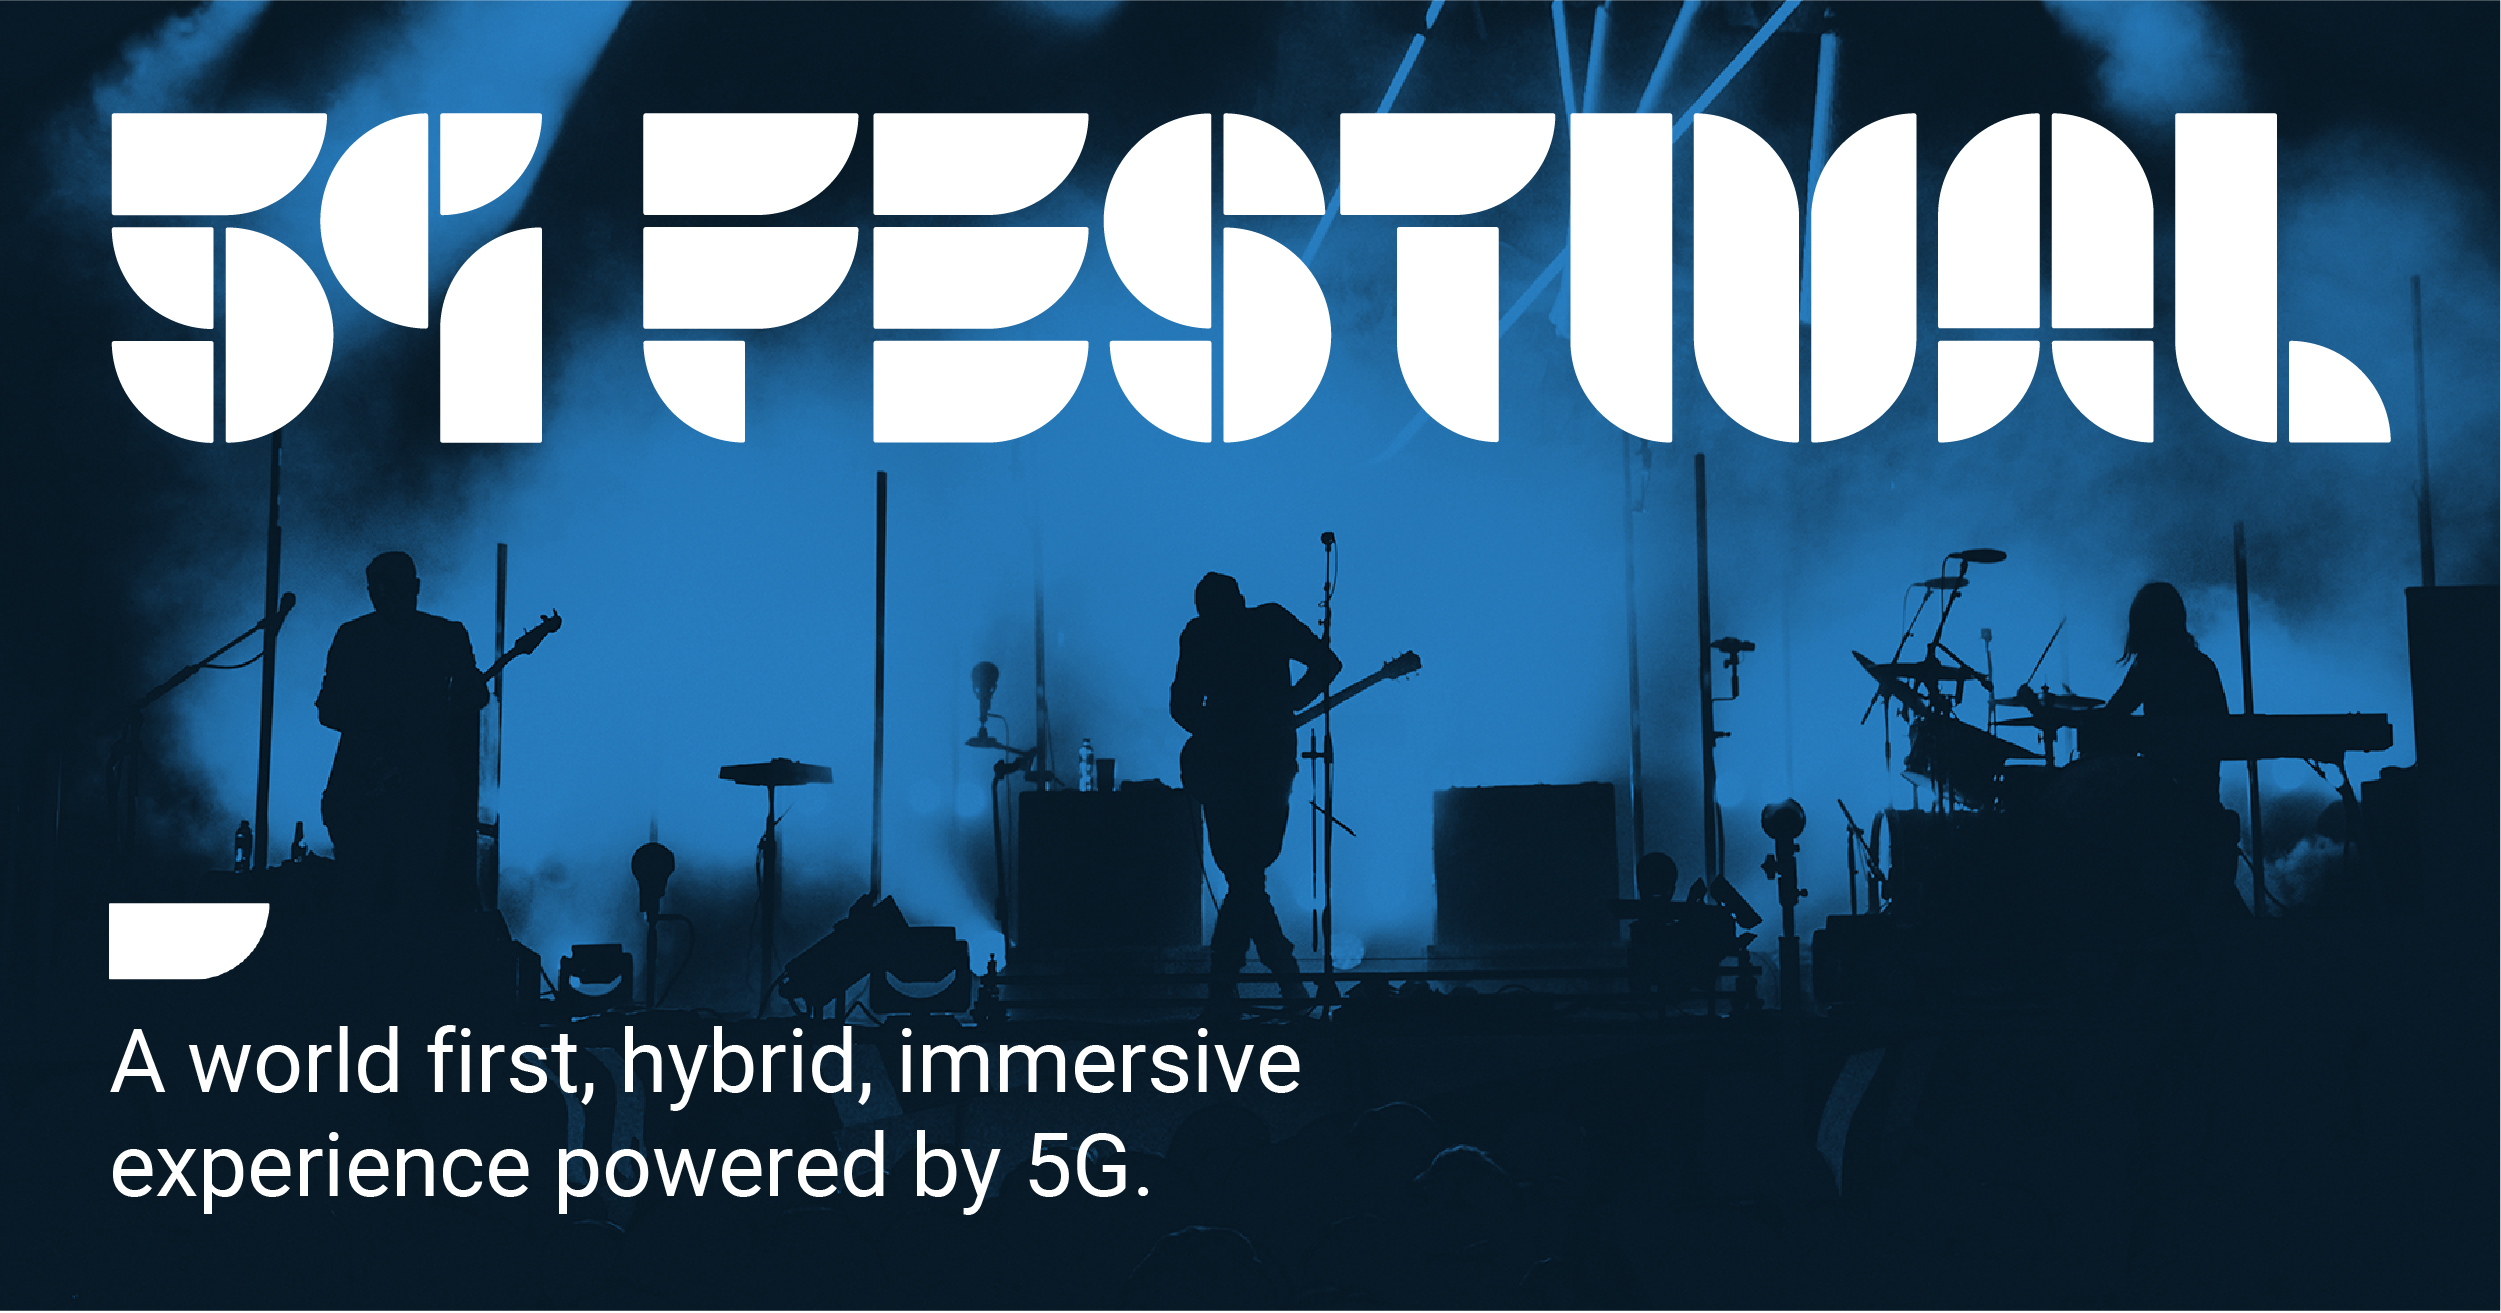 Metropolis Collaborating on Pioneering Immersive 5G Festival Experience